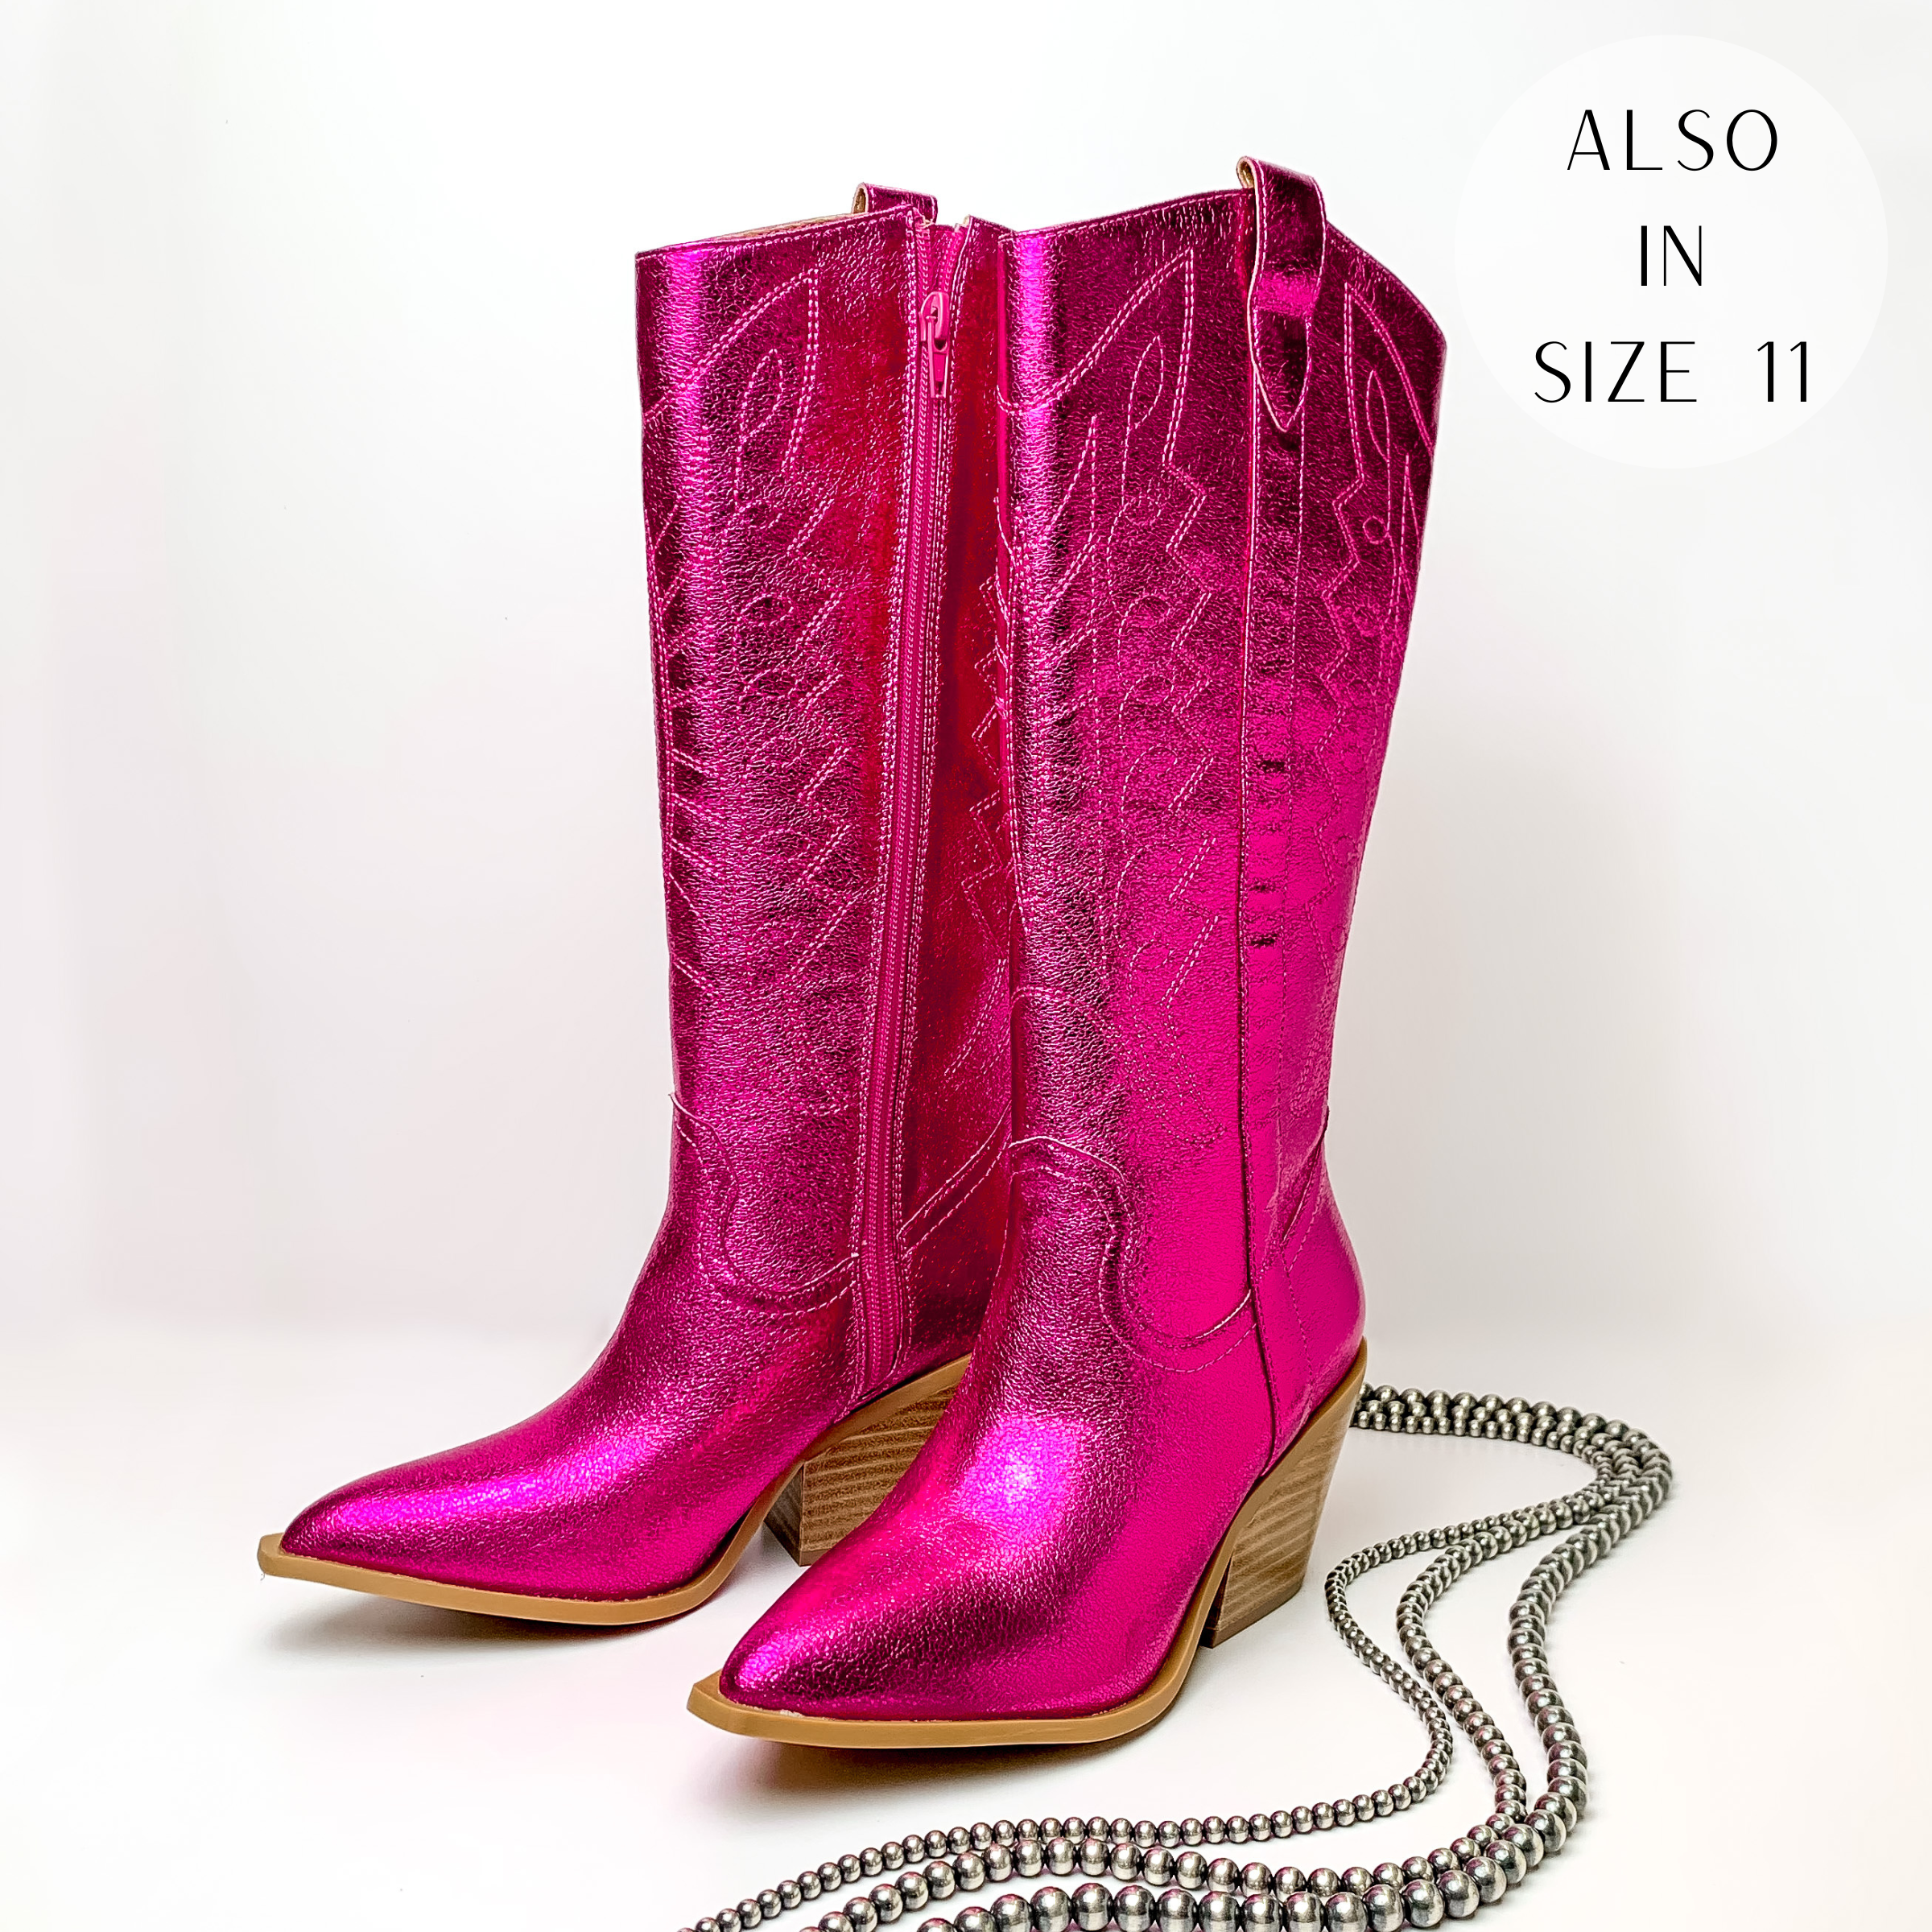 Metallic fuchsia cowboy boots with fuchsia western stitching and tan heel. These boots are pictured on a white background with silver beads on the right side of the boots.